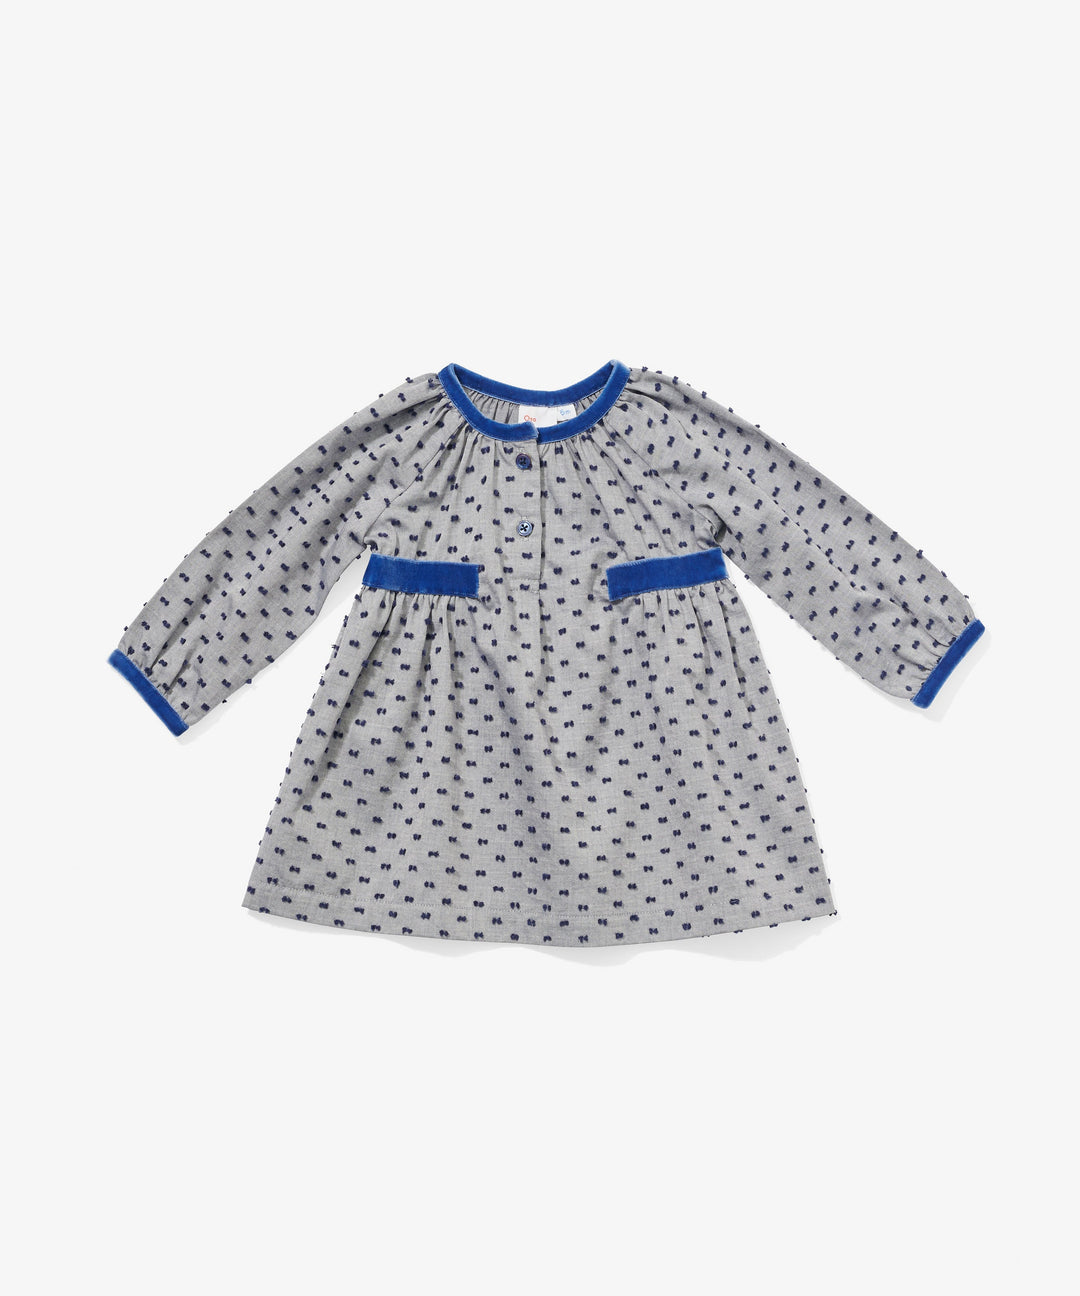 Elizabeth Baby Dress and Bowie Baby Pant | Oso & me – Oso & Me